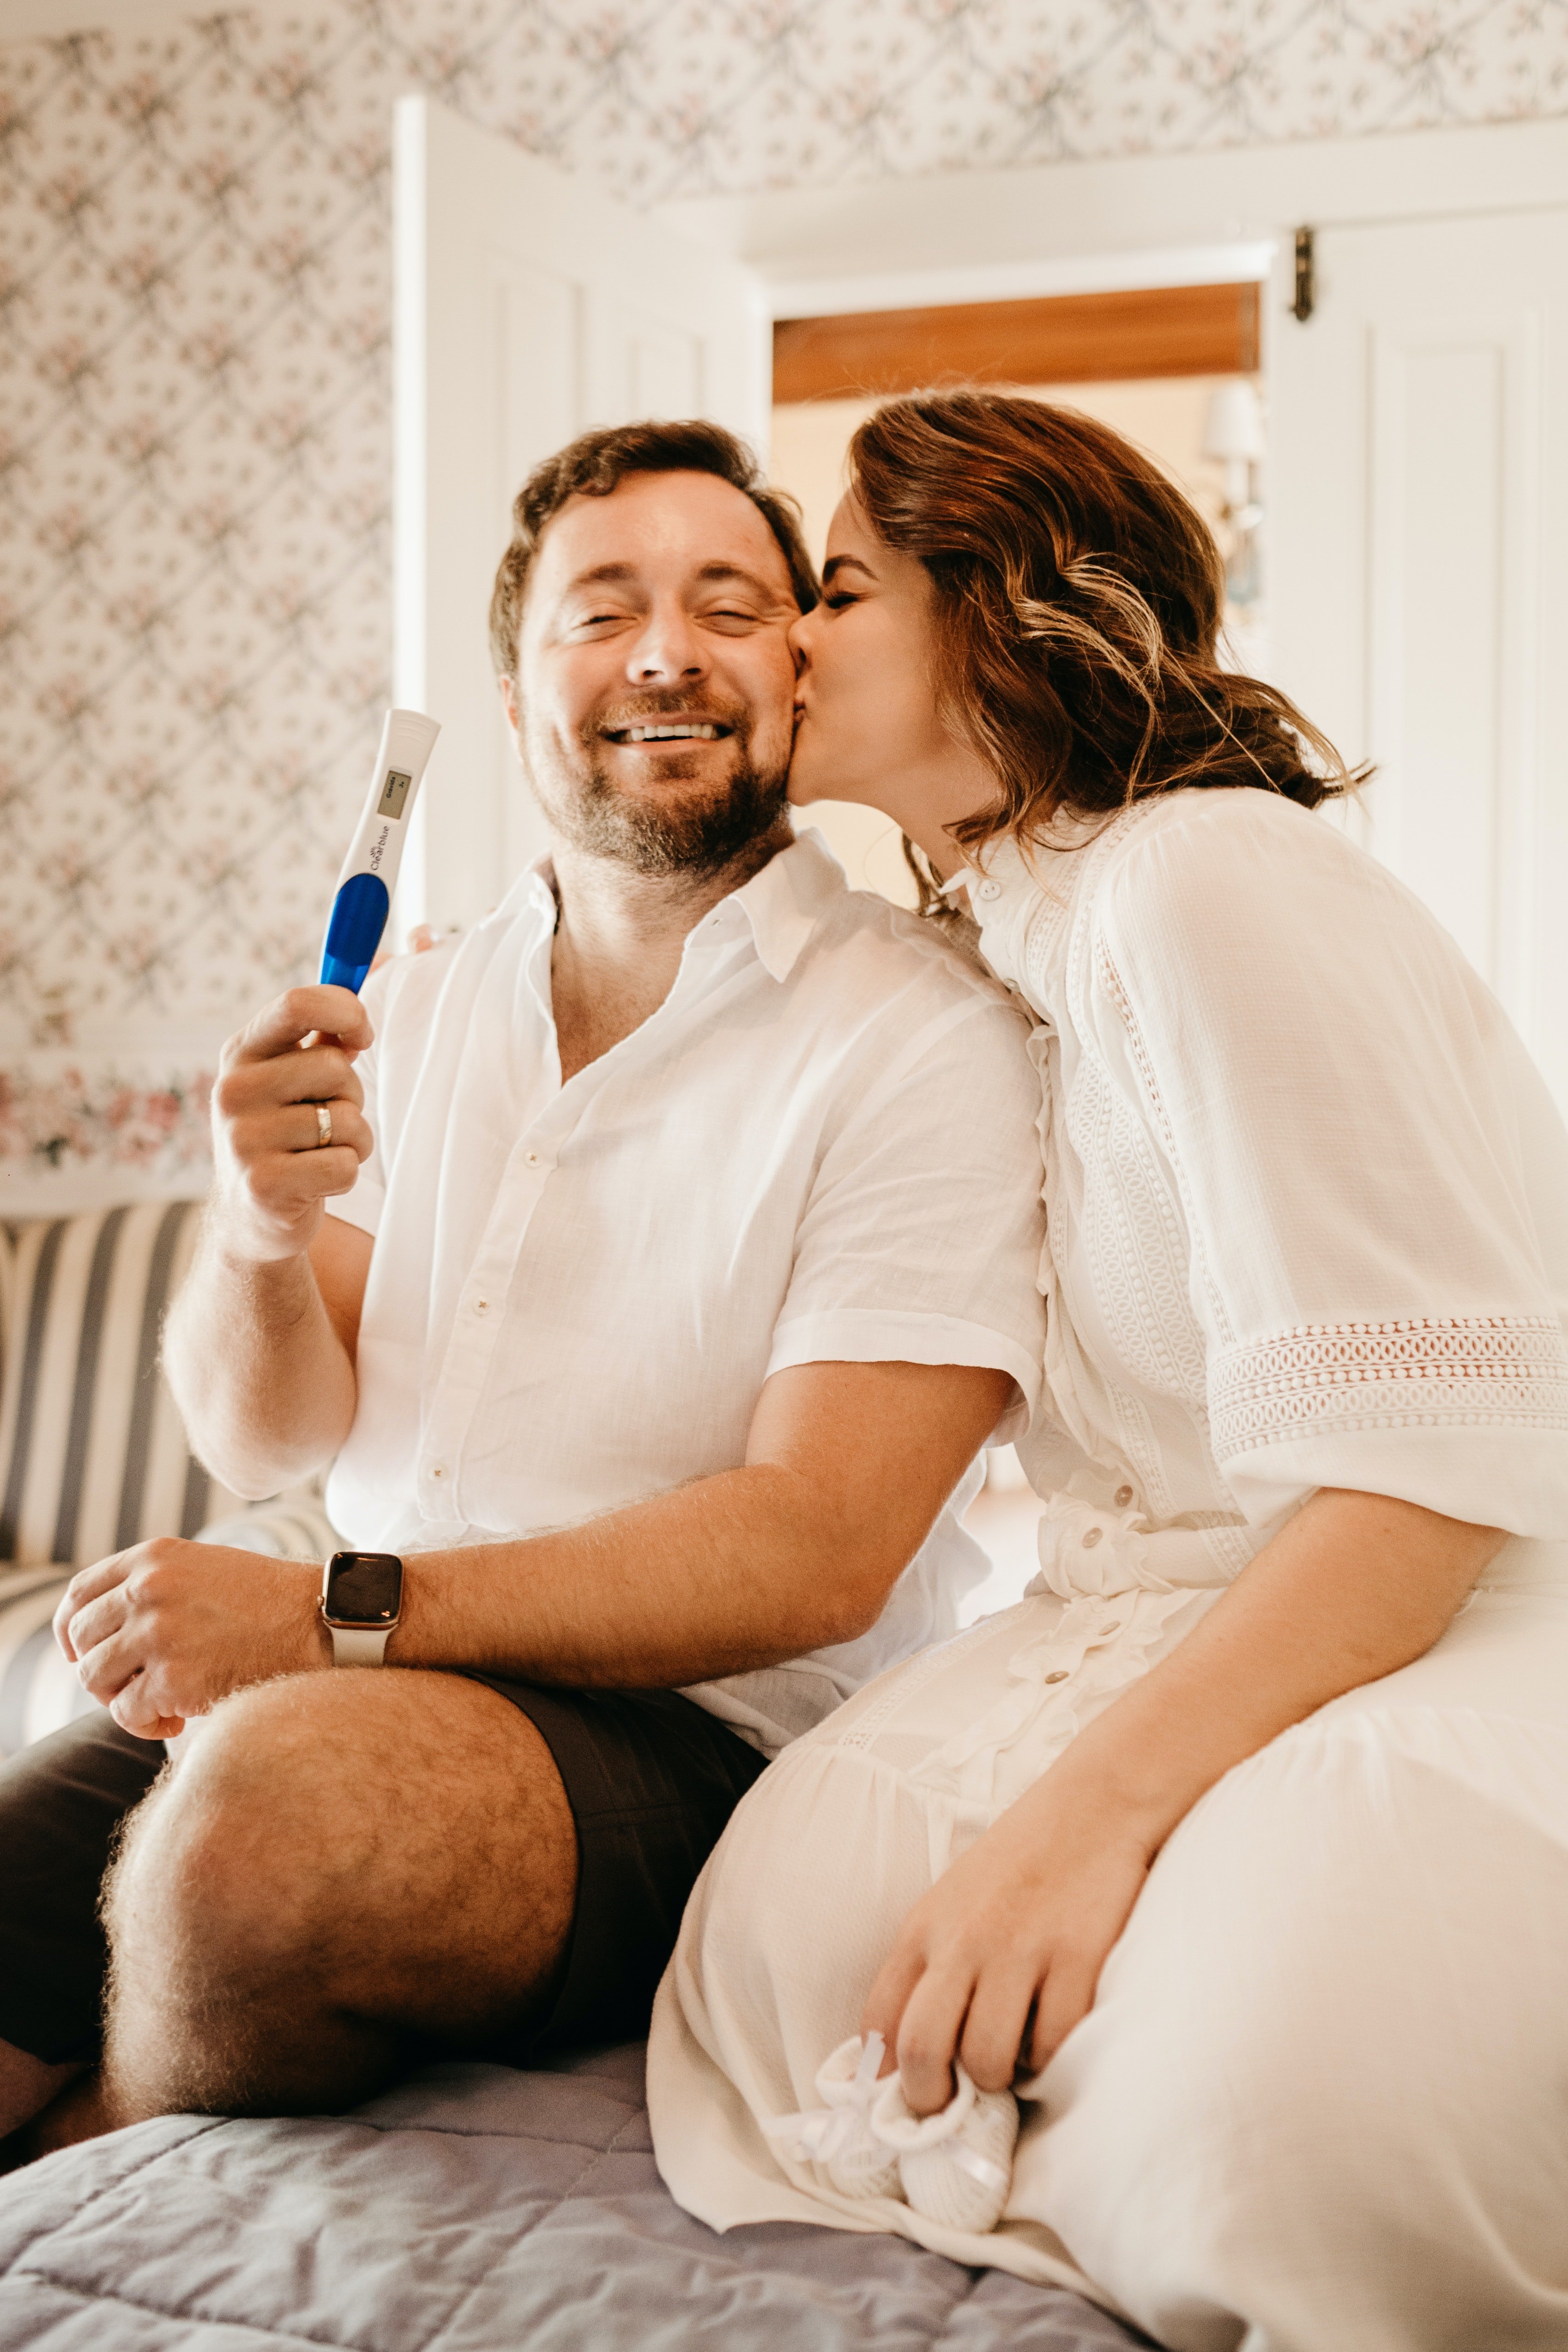 Wife reveals she's pregnant and her husband is overly excited | Photo: Unsplash/jonathanborba